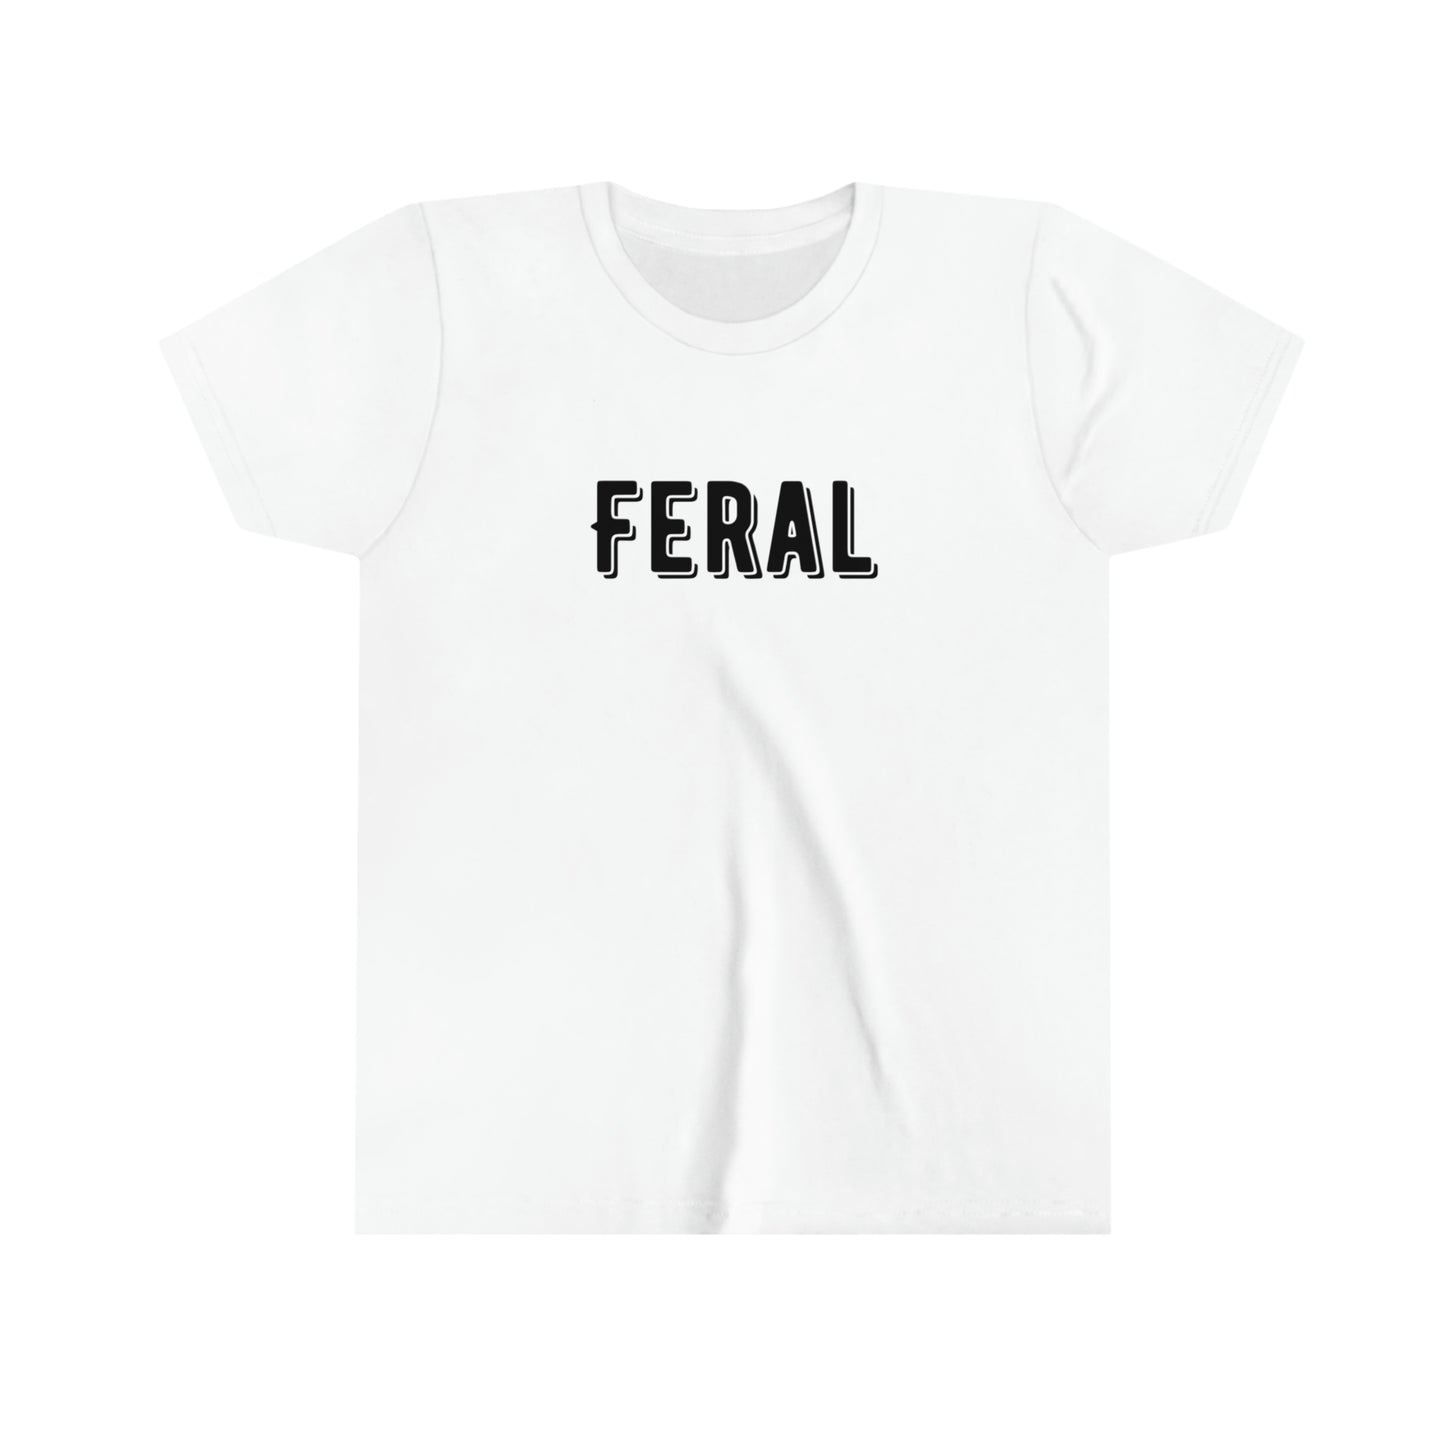 "Feral" Youth Short Sleeve Tee